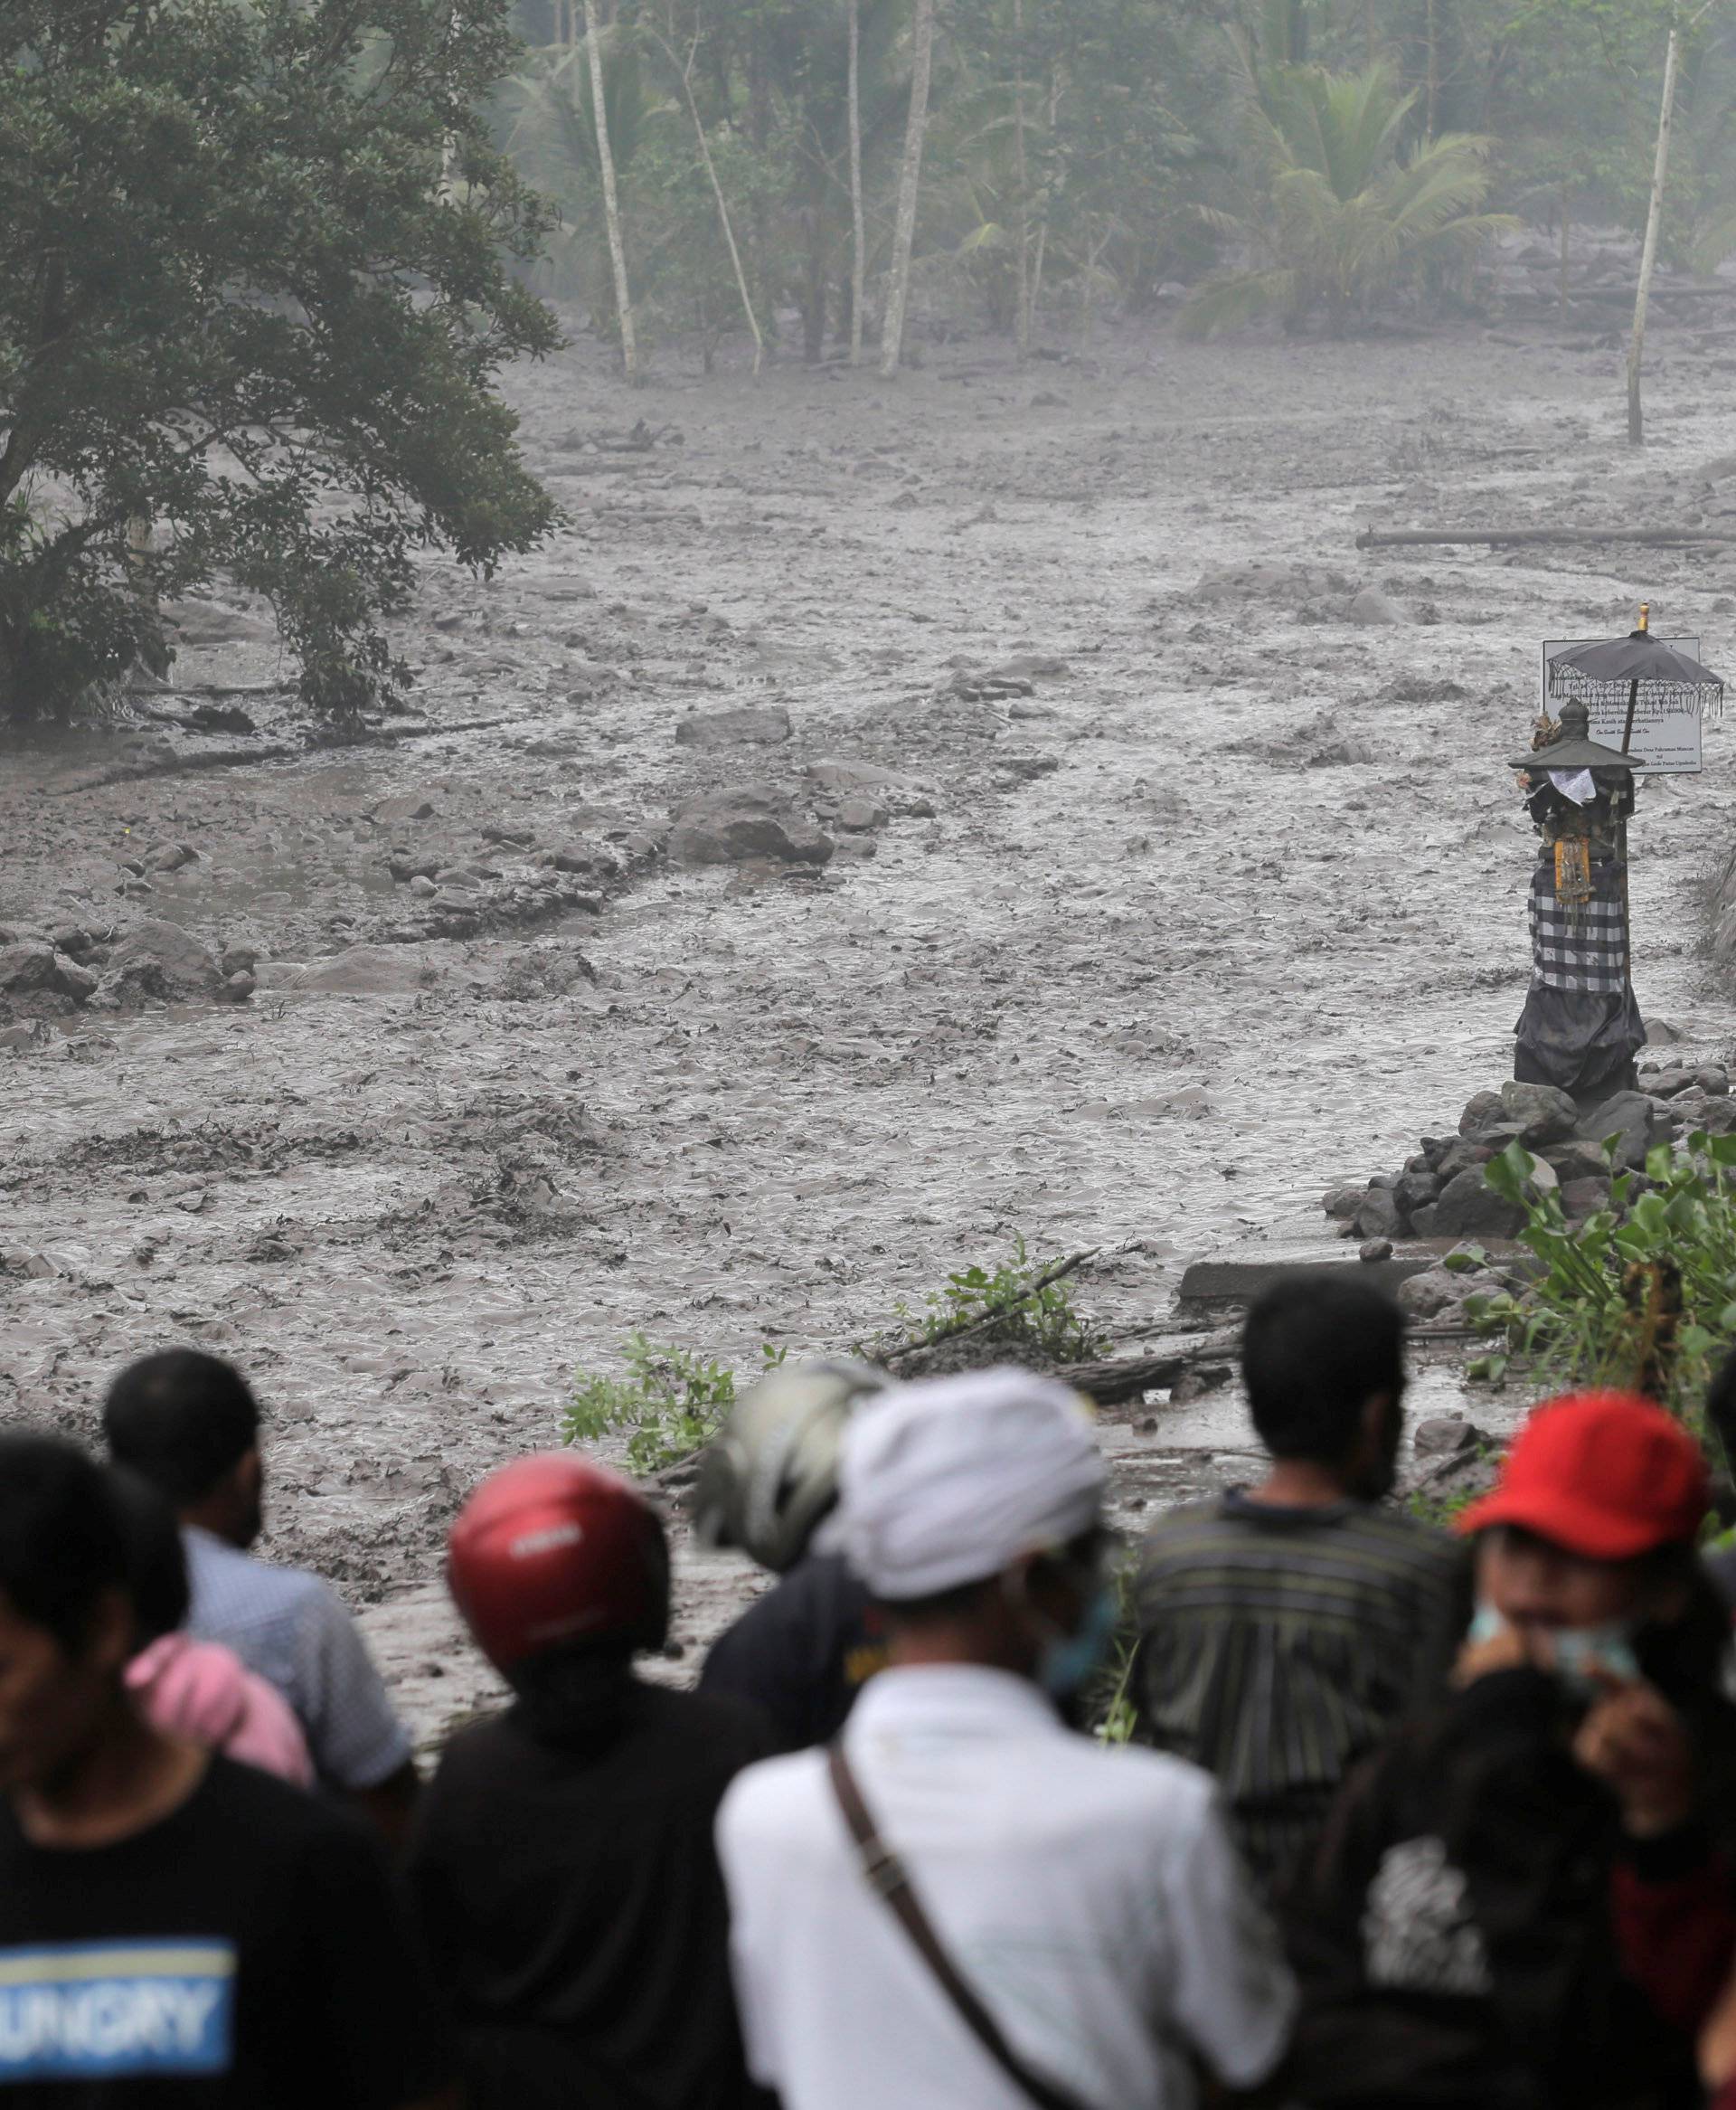 Villagers watch a river overflowing with water mixed with volcanic ash during the eruption of Mount Agung in Karangasem